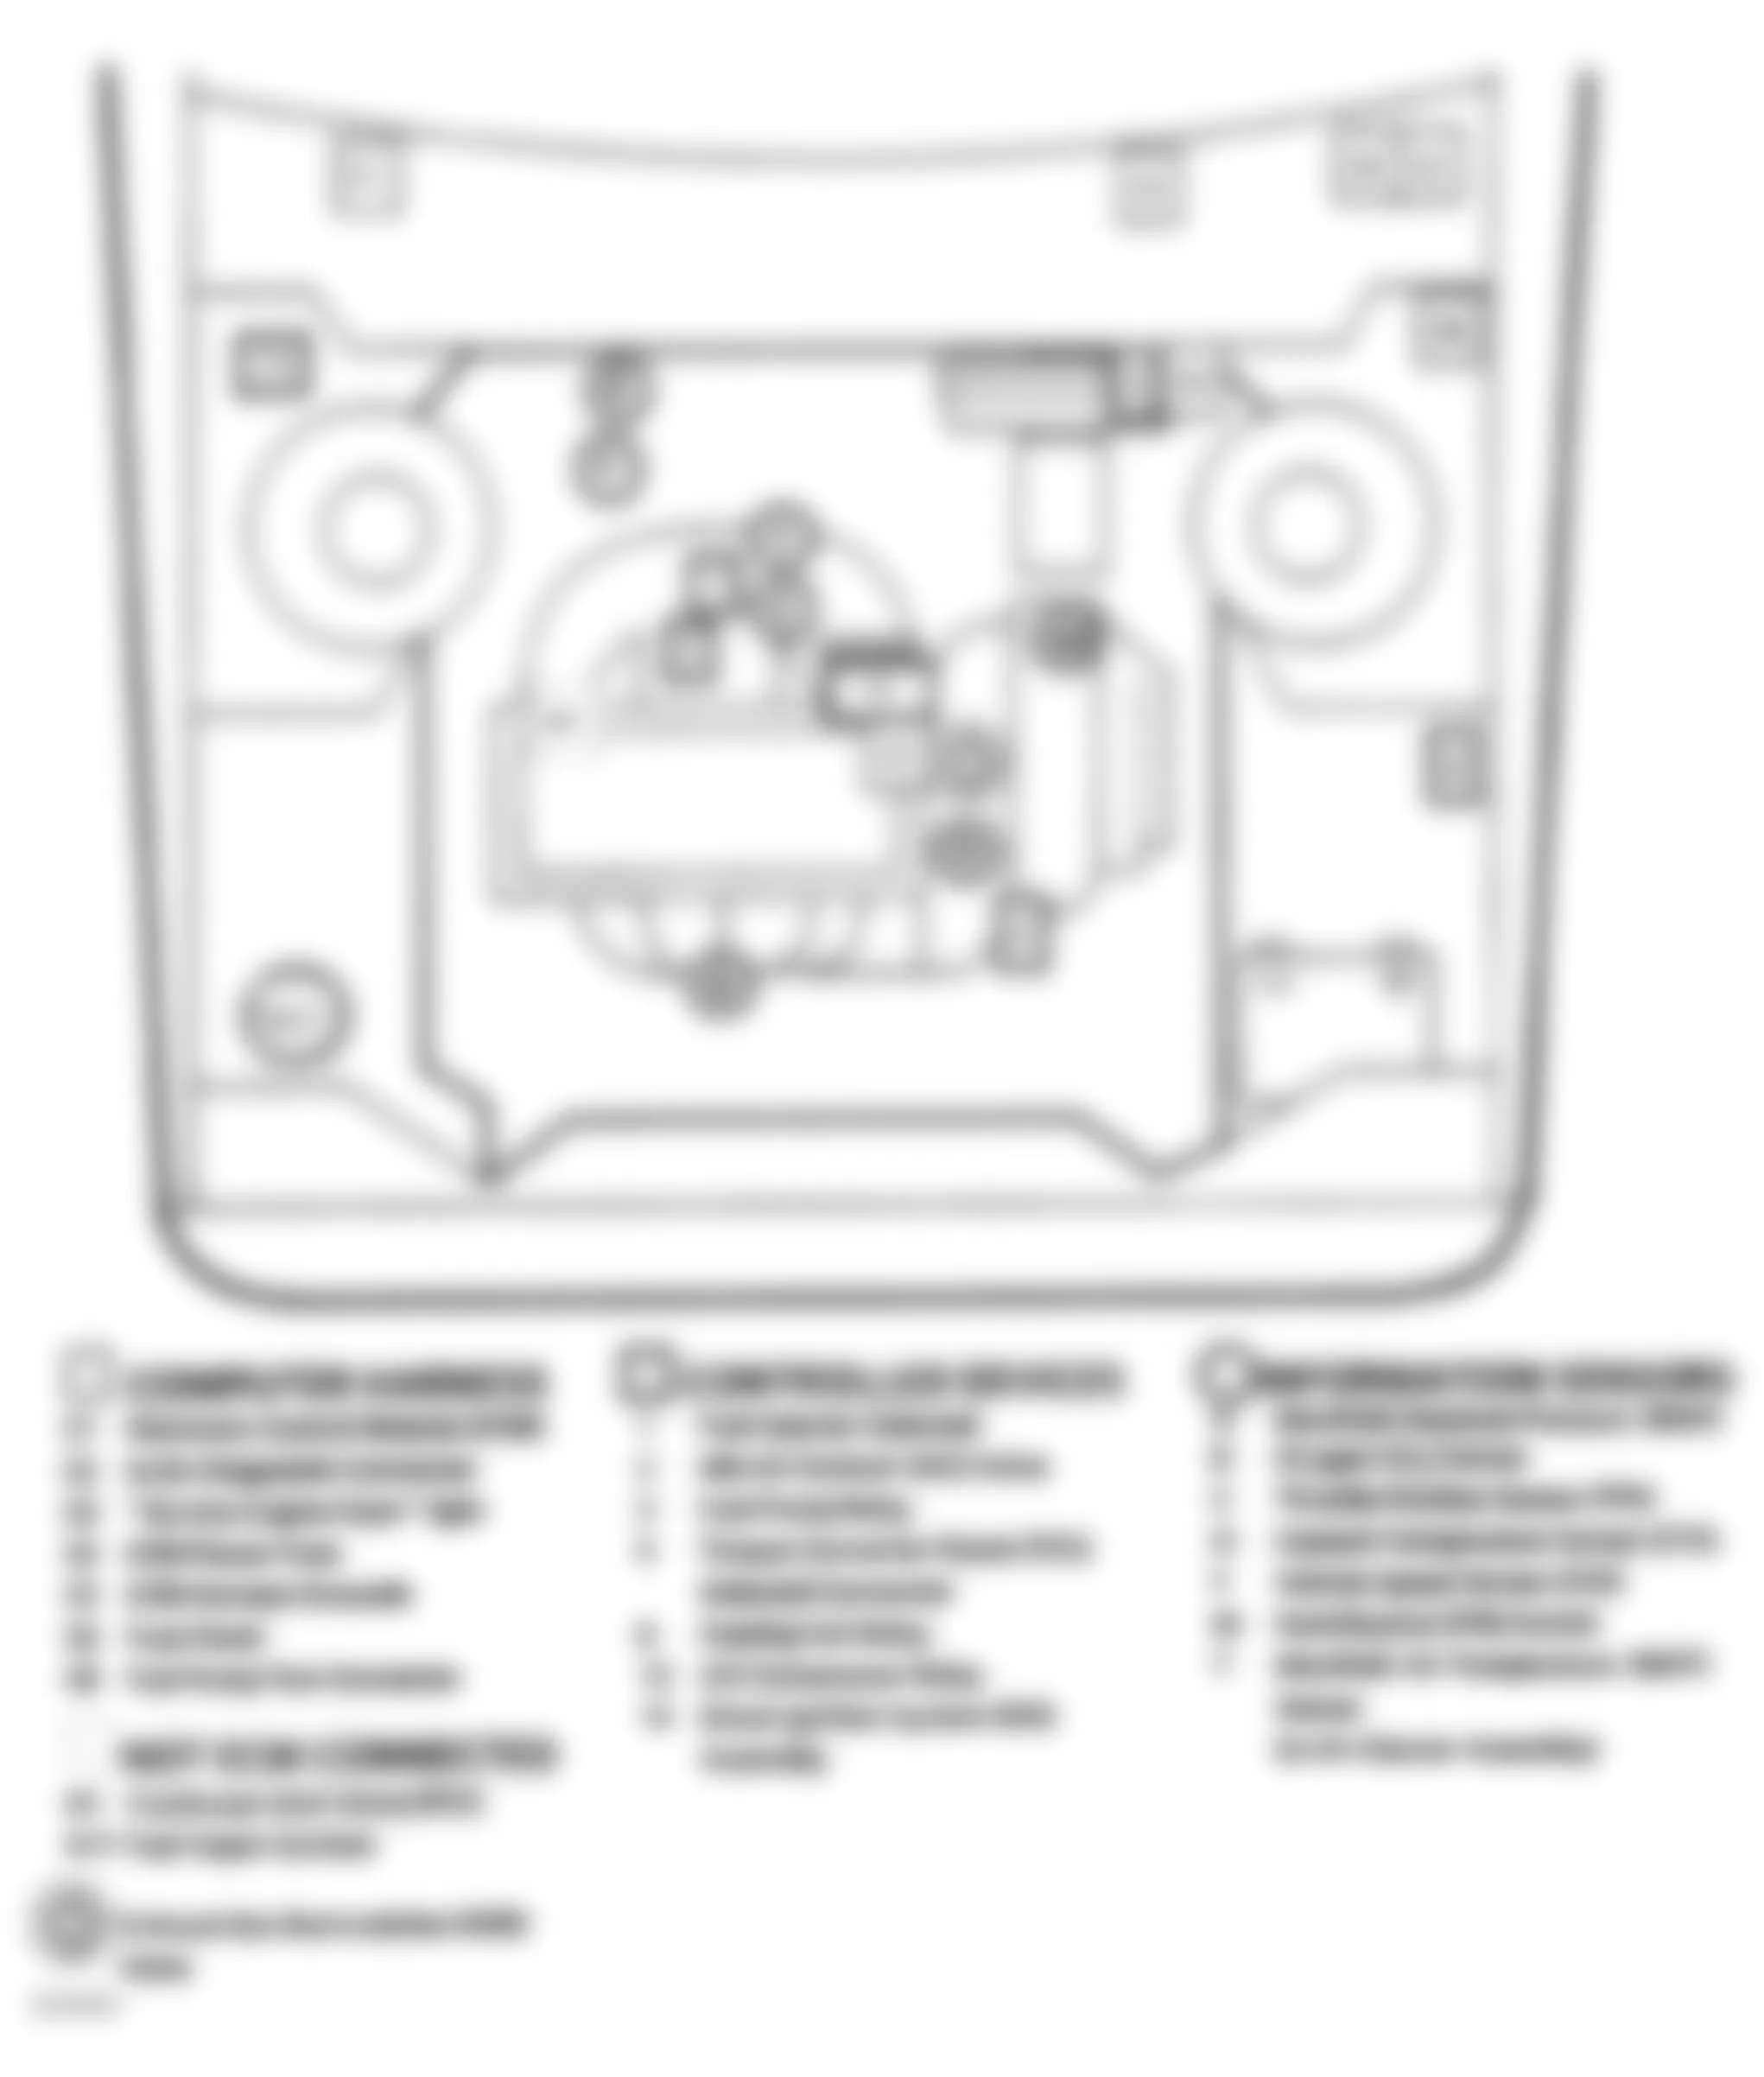 Chevrolet Cavalier VL 1990 - Component Locations -  Component Locations (3 Of 9)